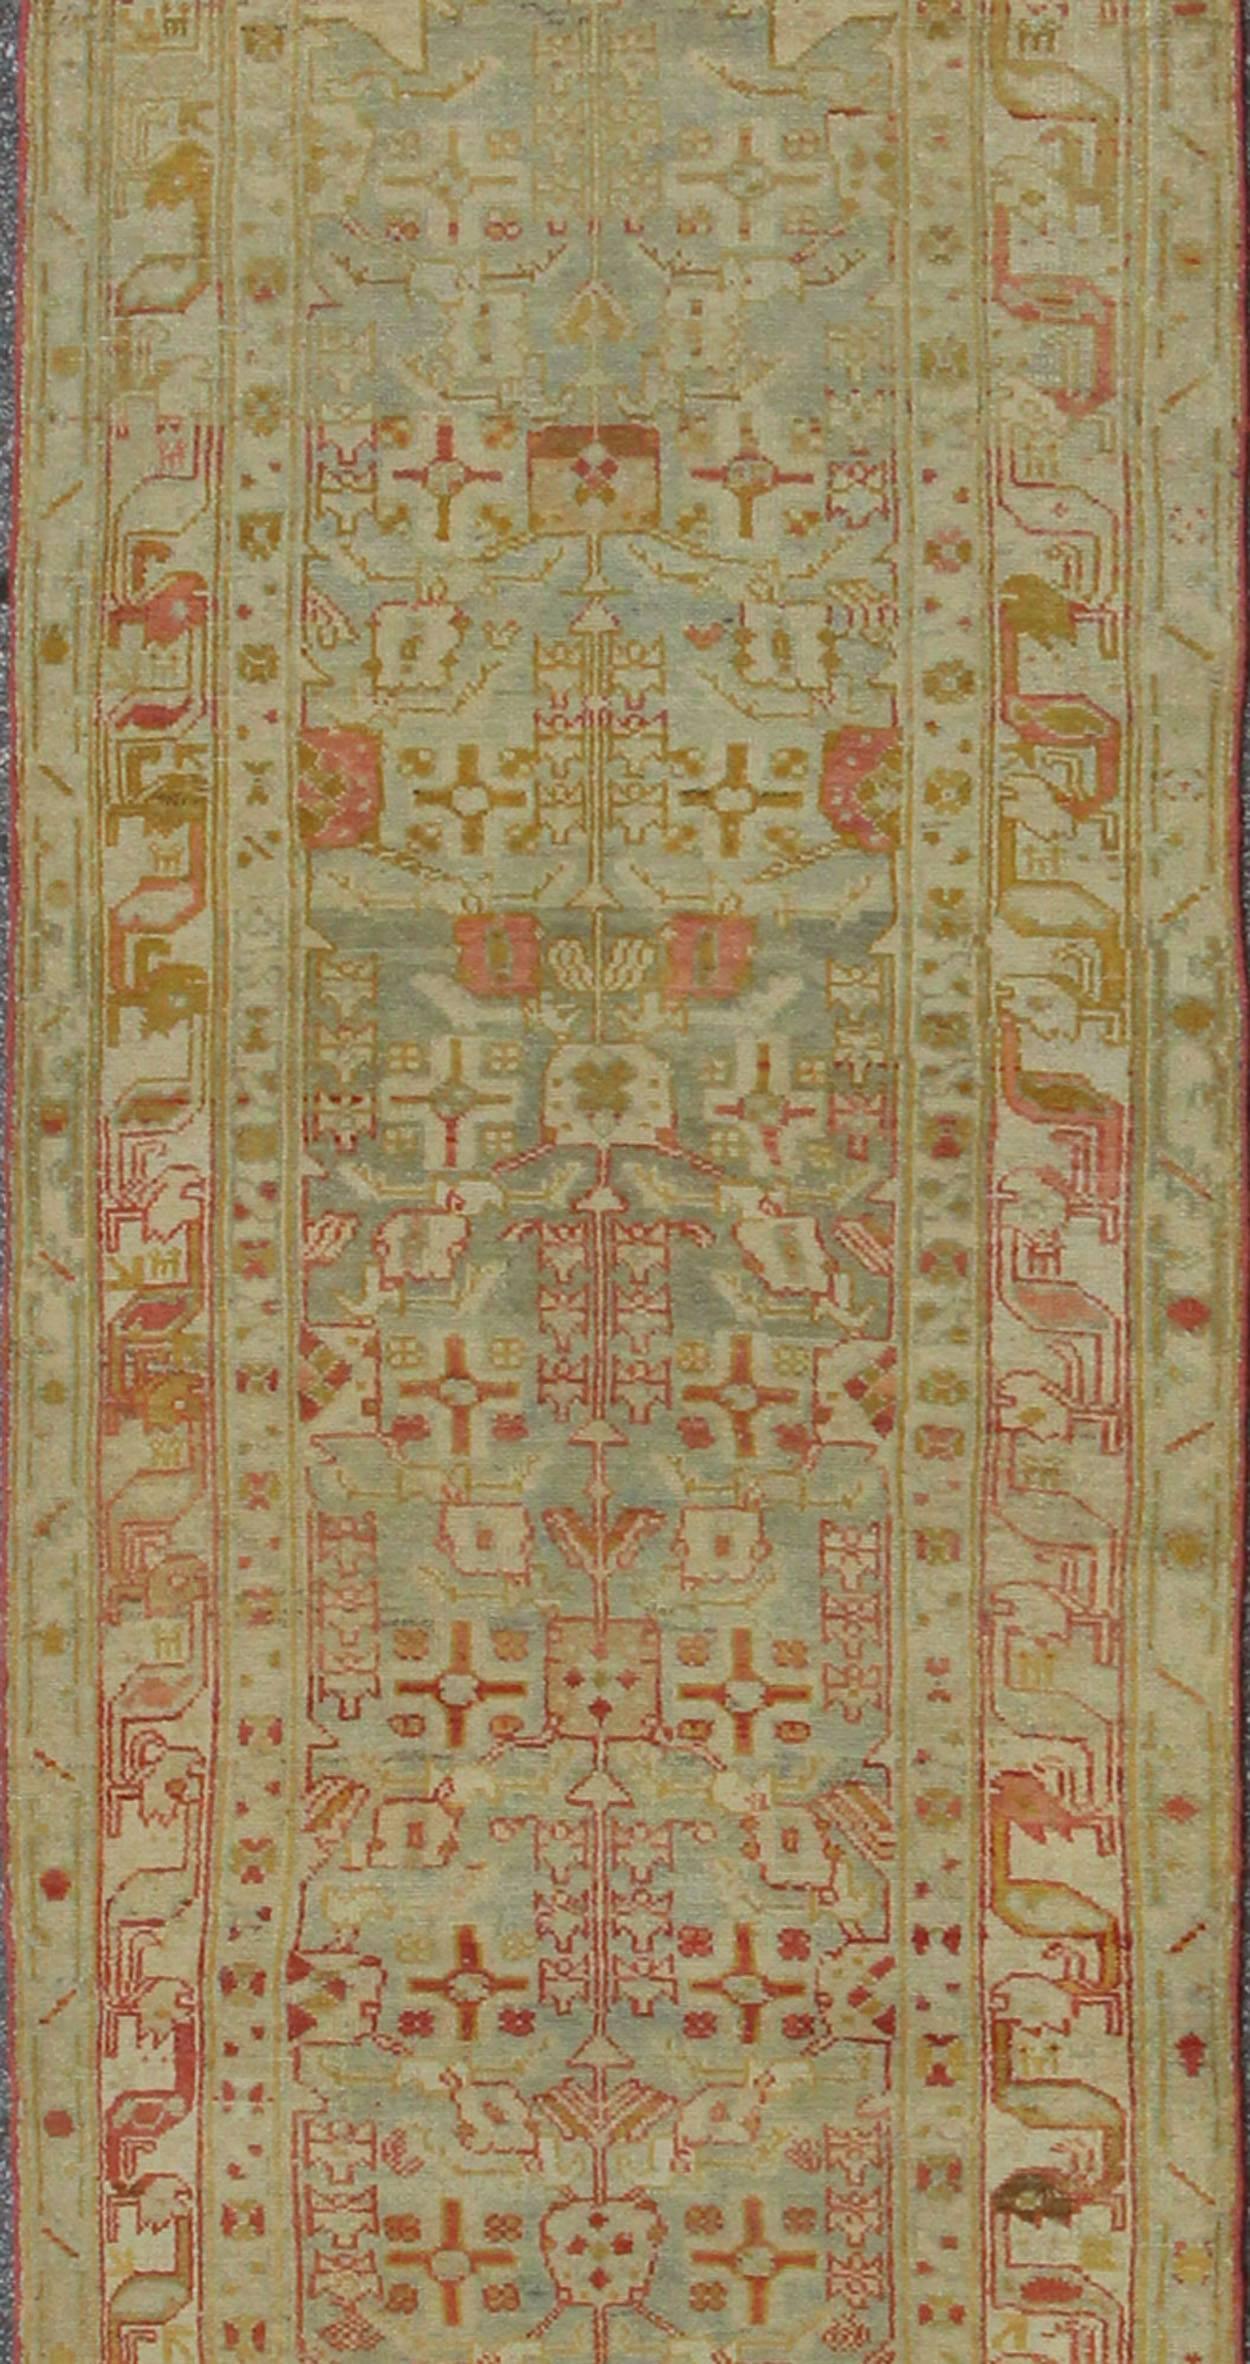 This magnificent antique Persian Malayer carpet of an impressive pattern bears a beautiful, all-over sub-geometric design paired with a delightful palette of coral, various blues and a very light peach. The central field is filled with a dazzling